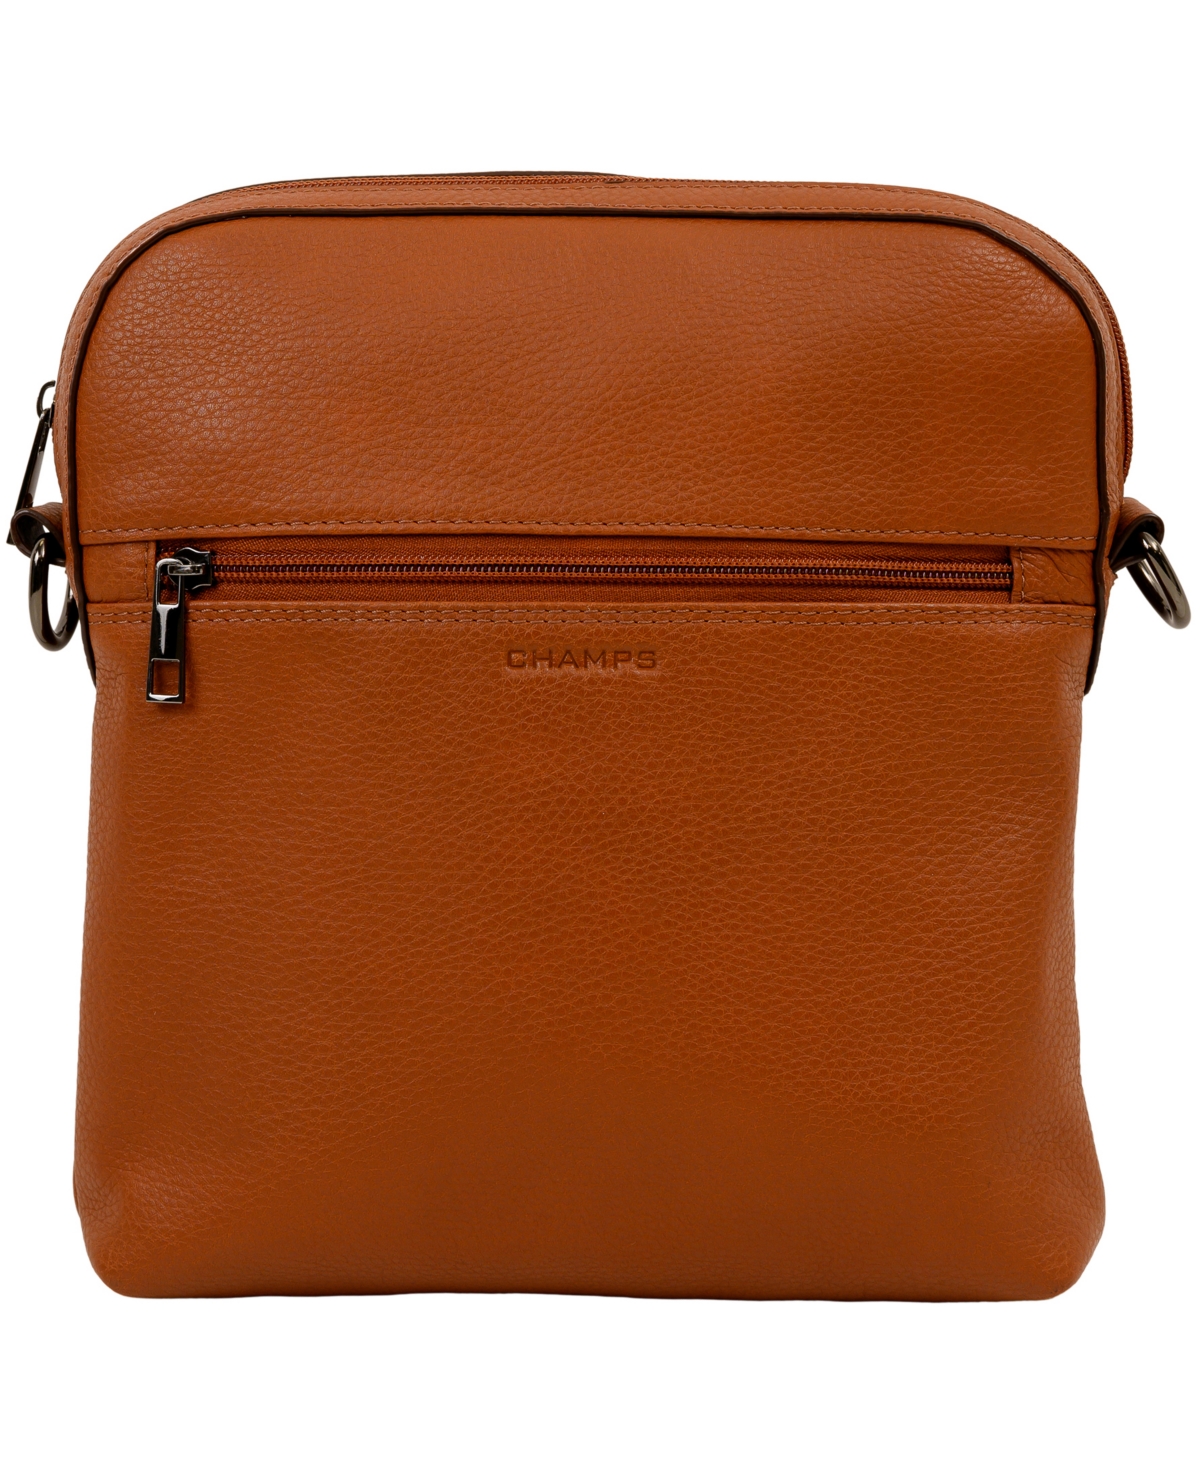 Onyx Leather Camera Bag - Brown